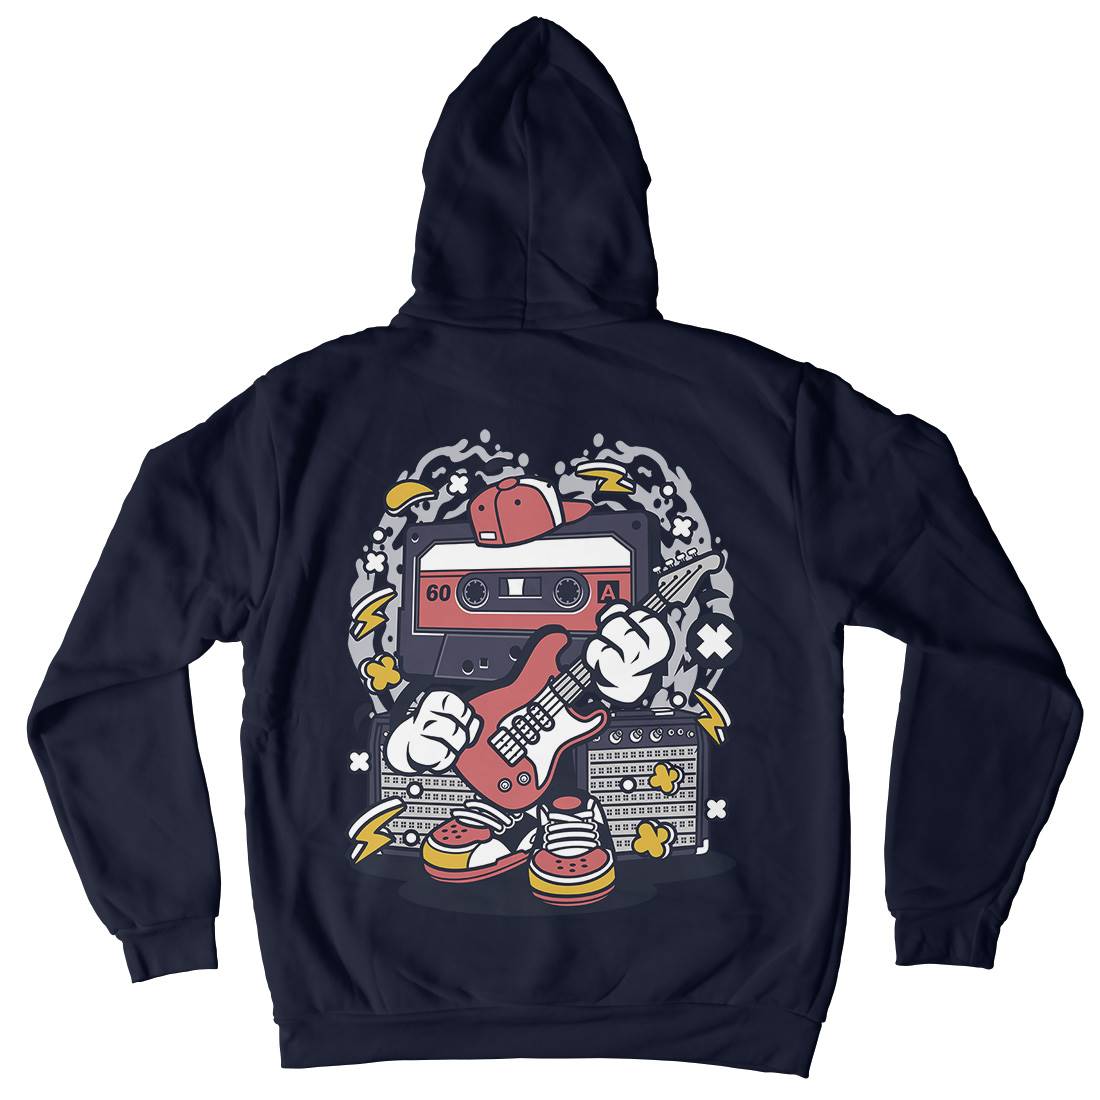 Cassette Rock Star Mens Hoodie With Pocket Music C511